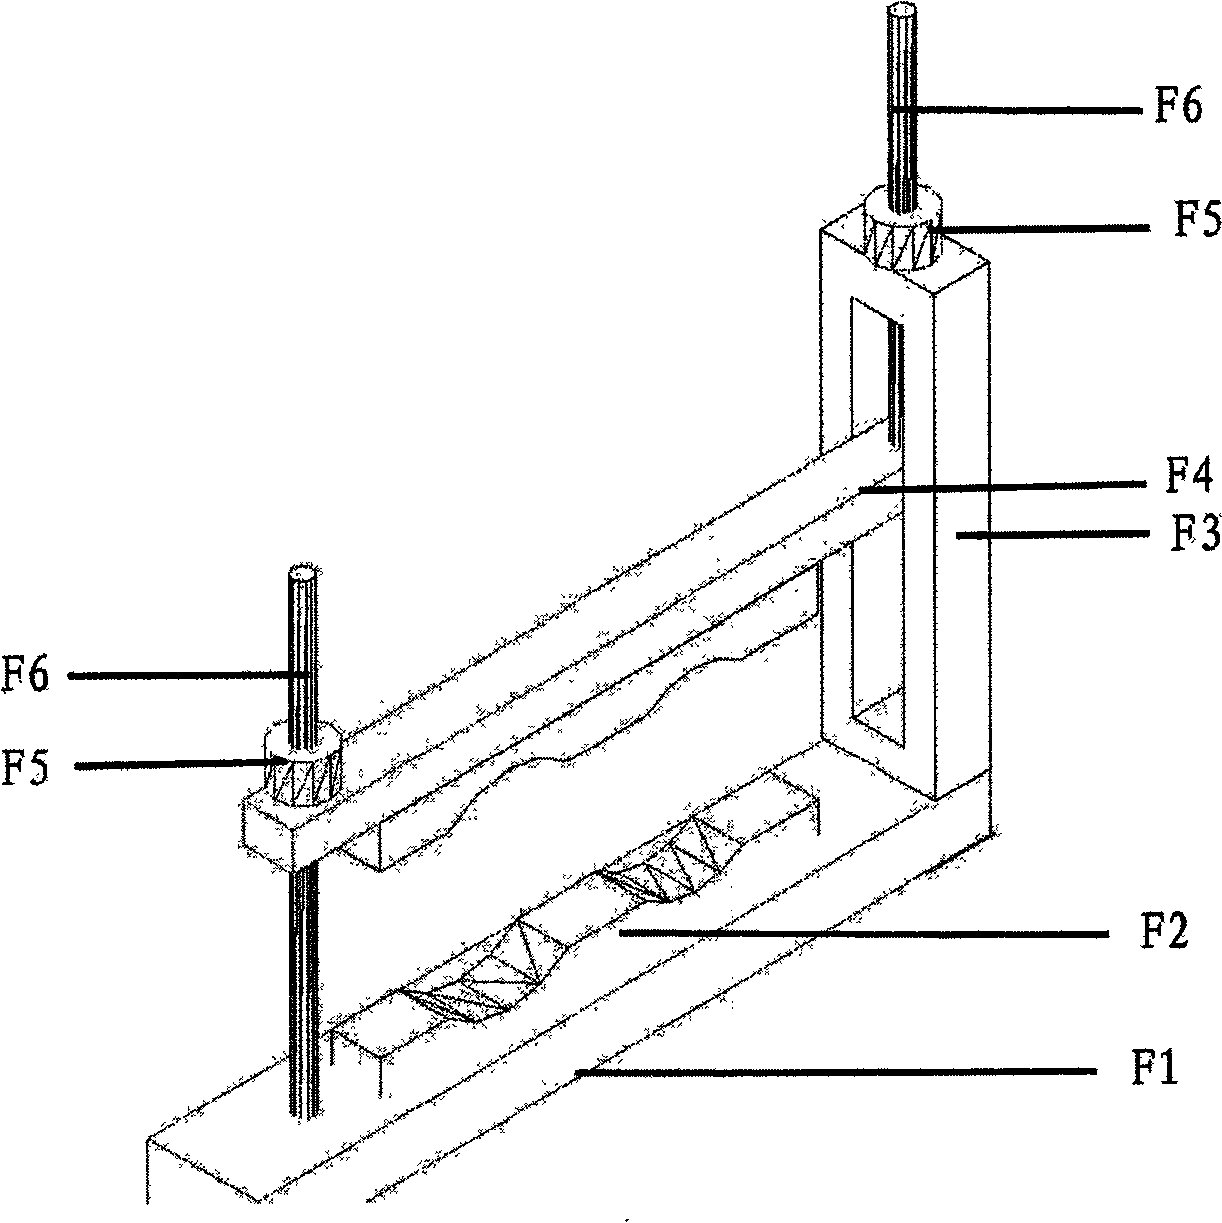 Cutting-grinding dual-purpose rock-processing system with double end faces